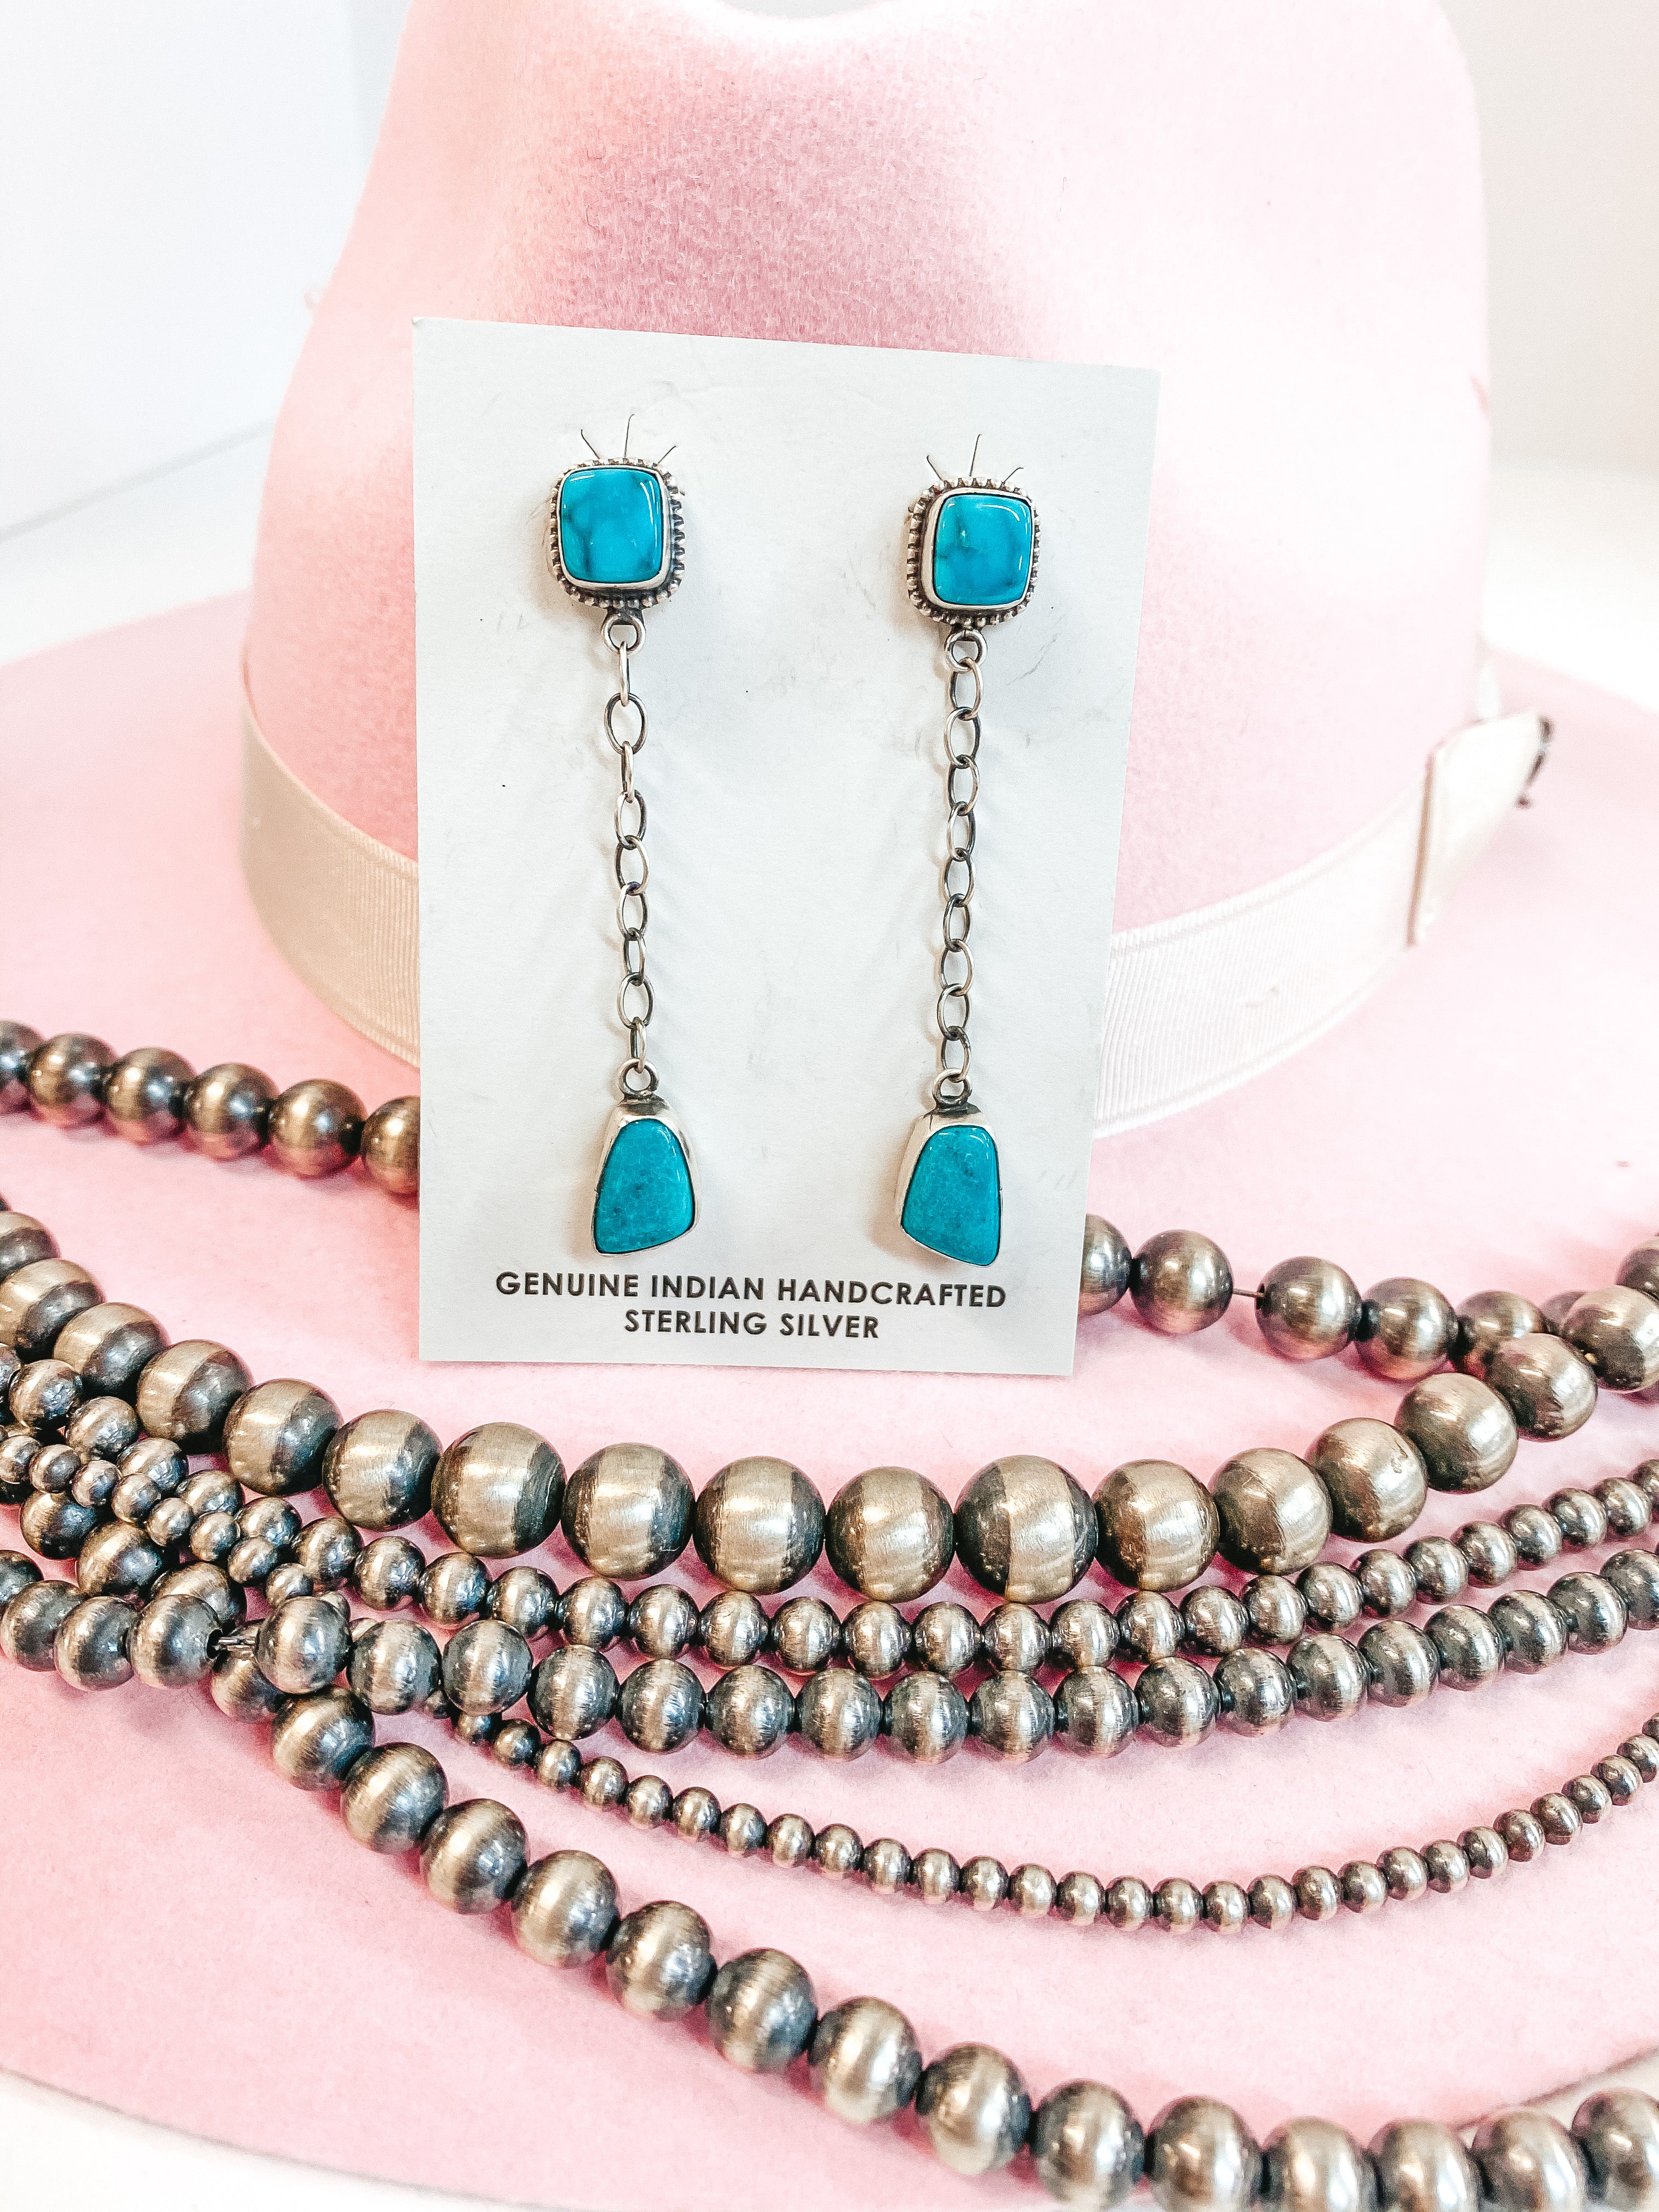 Tricia Smith | Navajo Handmade Sterling Silver Chain Drop Earrings with Kingman Turquoise Studs - Giddy Up Glamour Boutique